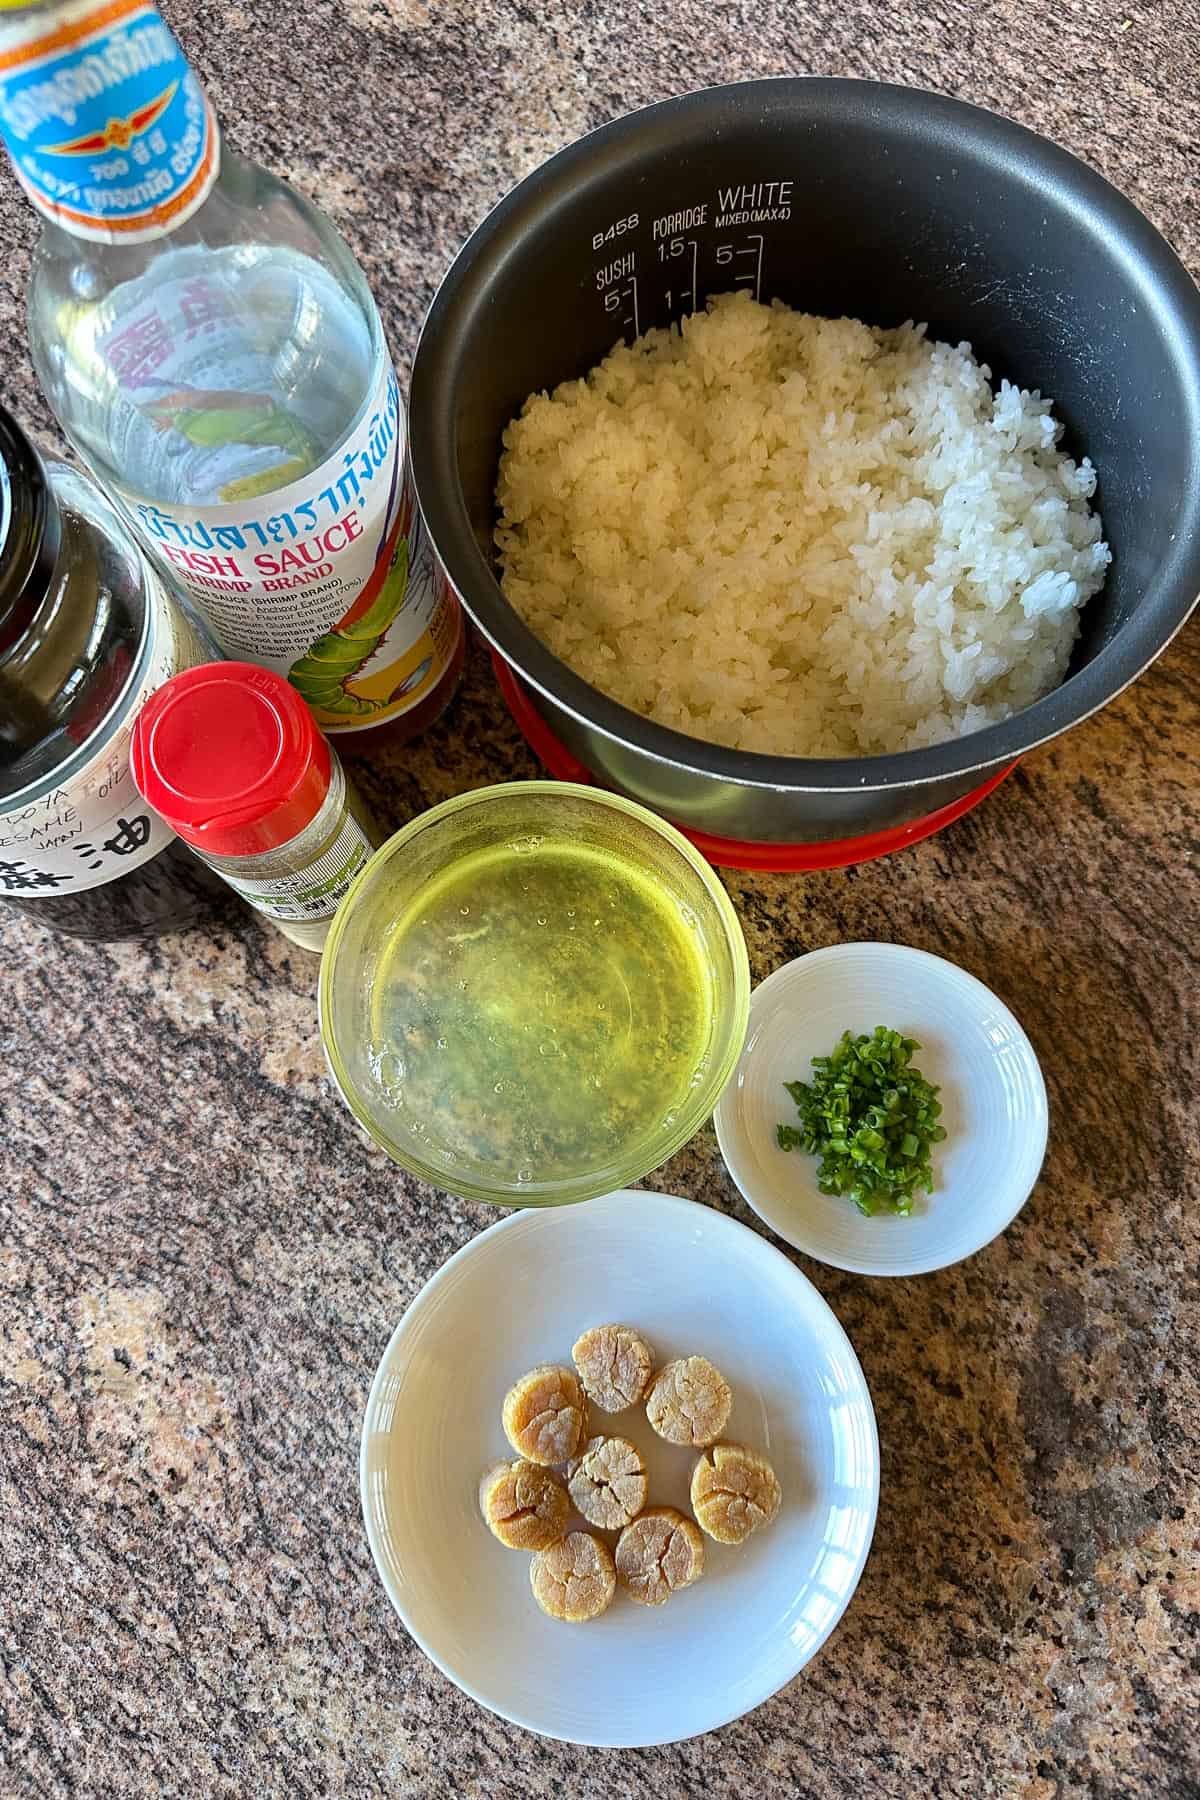 Ingredients for Dried Scallop and Egg White Fried Rice laid out on a table (rice, dried scallops, egg whites, green onions, fish sauce, sesame oil, and white pepper).